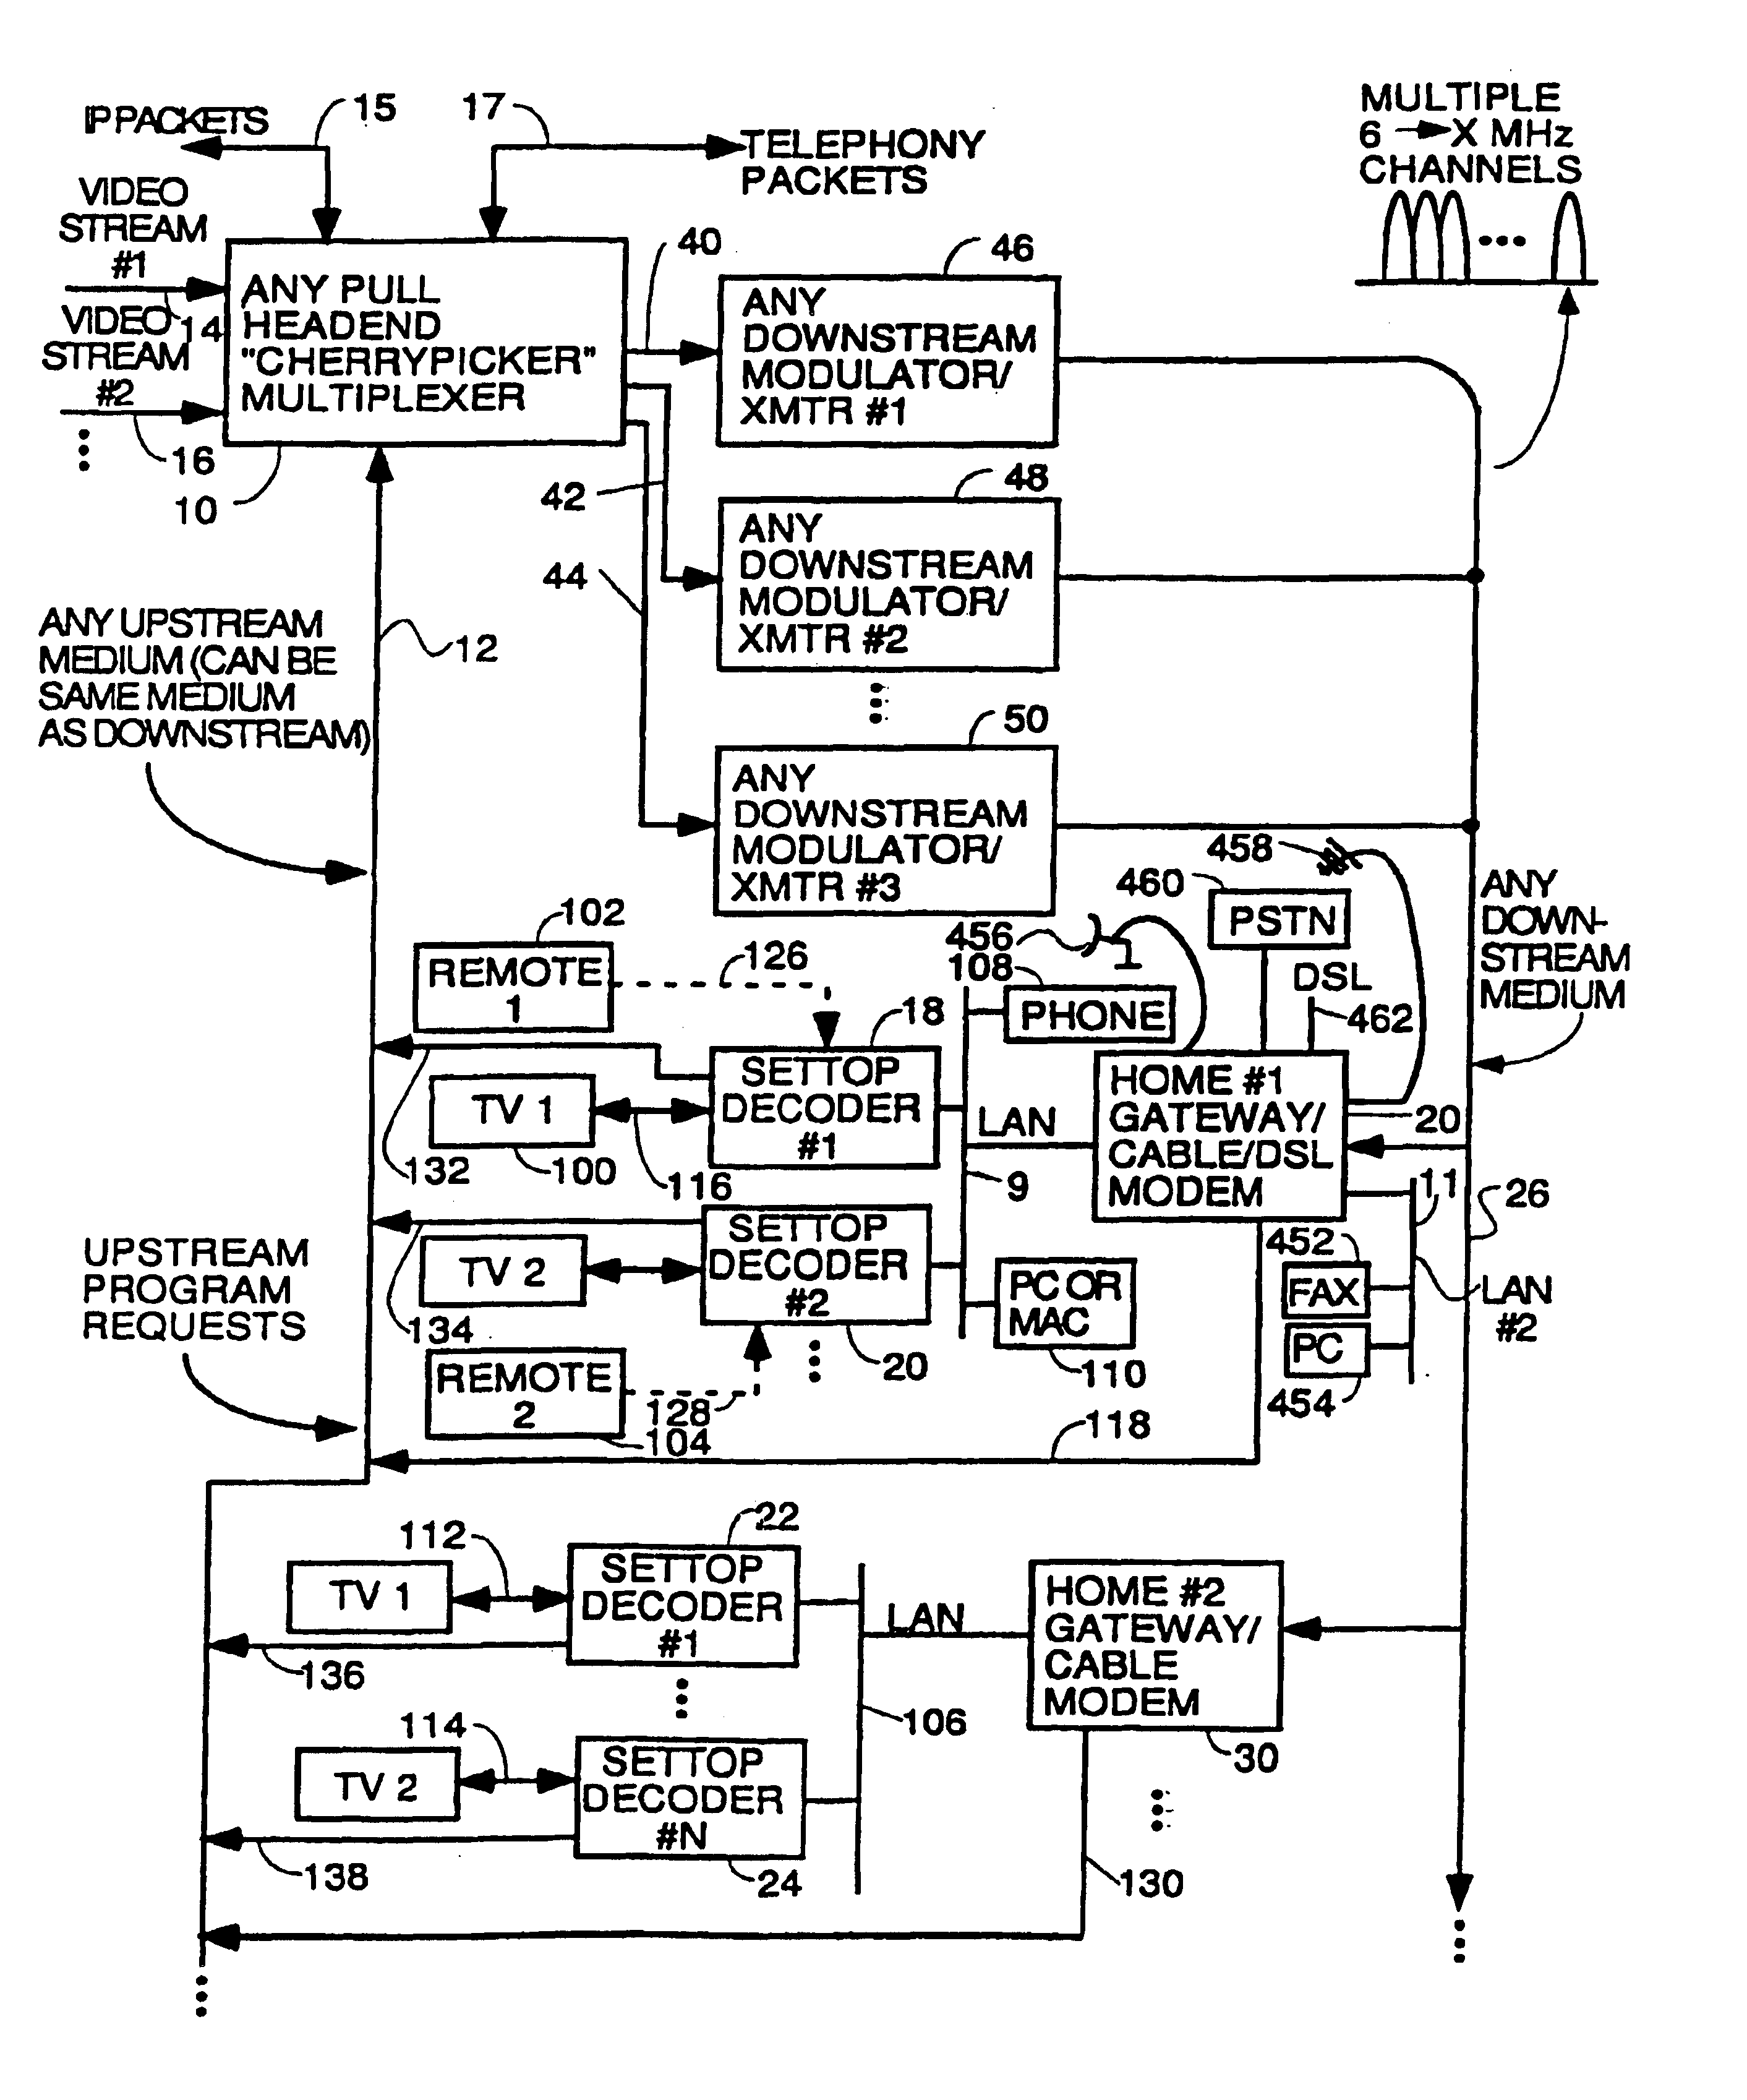 Process for supplying video-on-demand and other requested programs and services from a headend